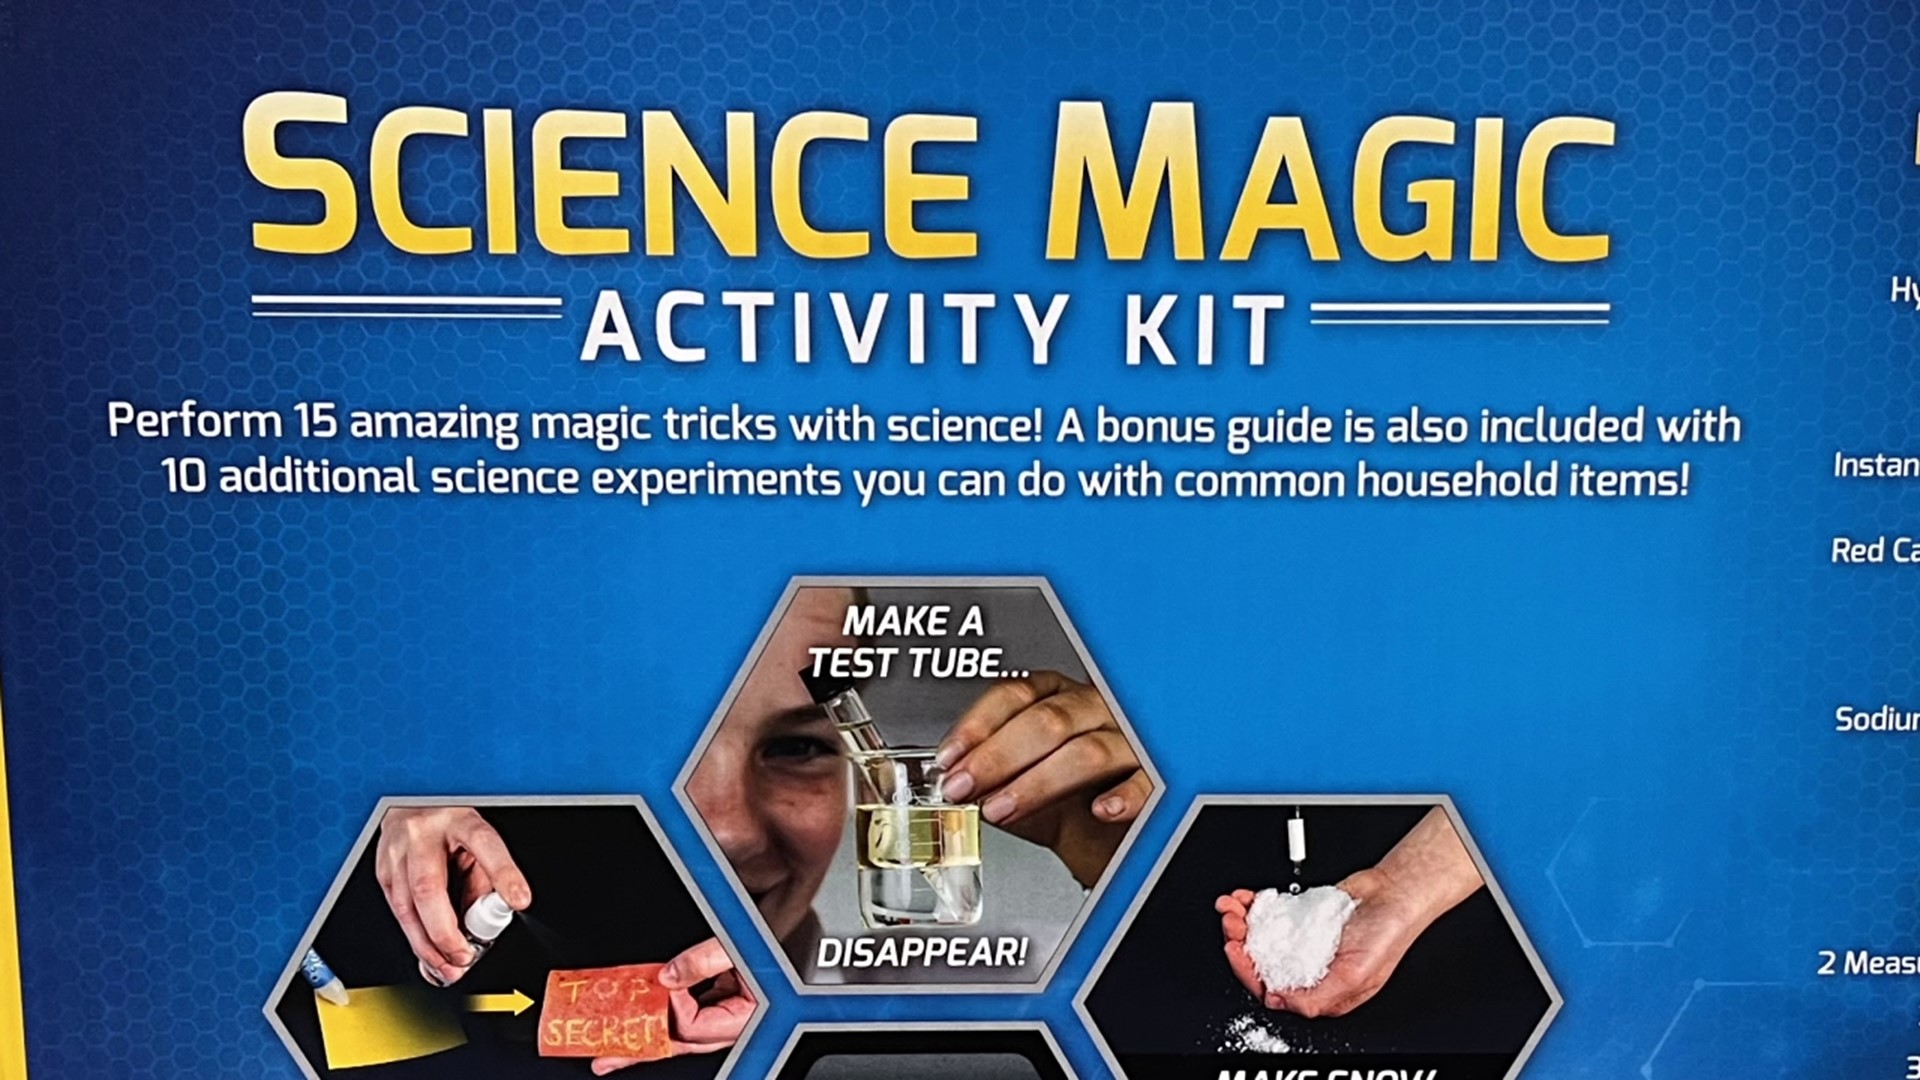 National Geographic Science Kits on Sale